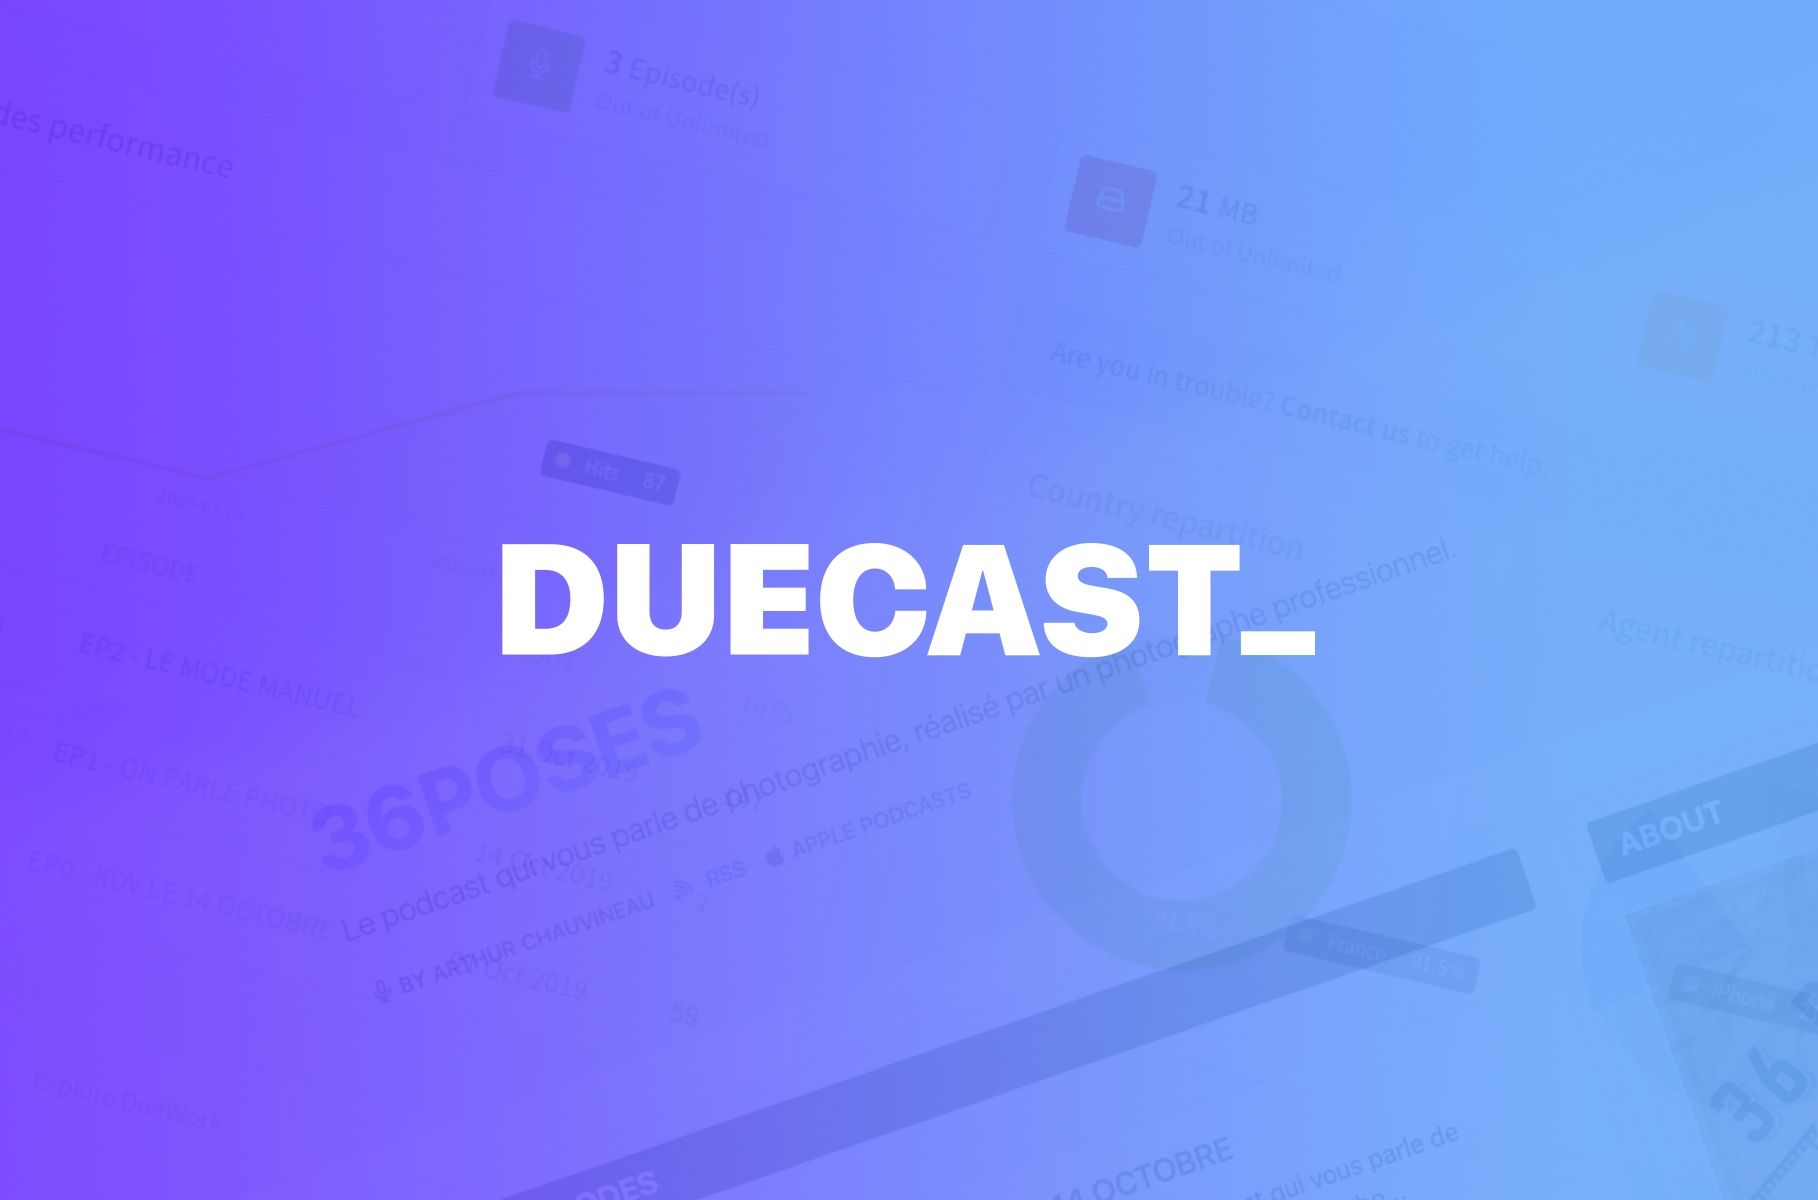 Why I Built DueCast, a Podcast Platform for a Client, and Decided to Make It a Thing for Everyone